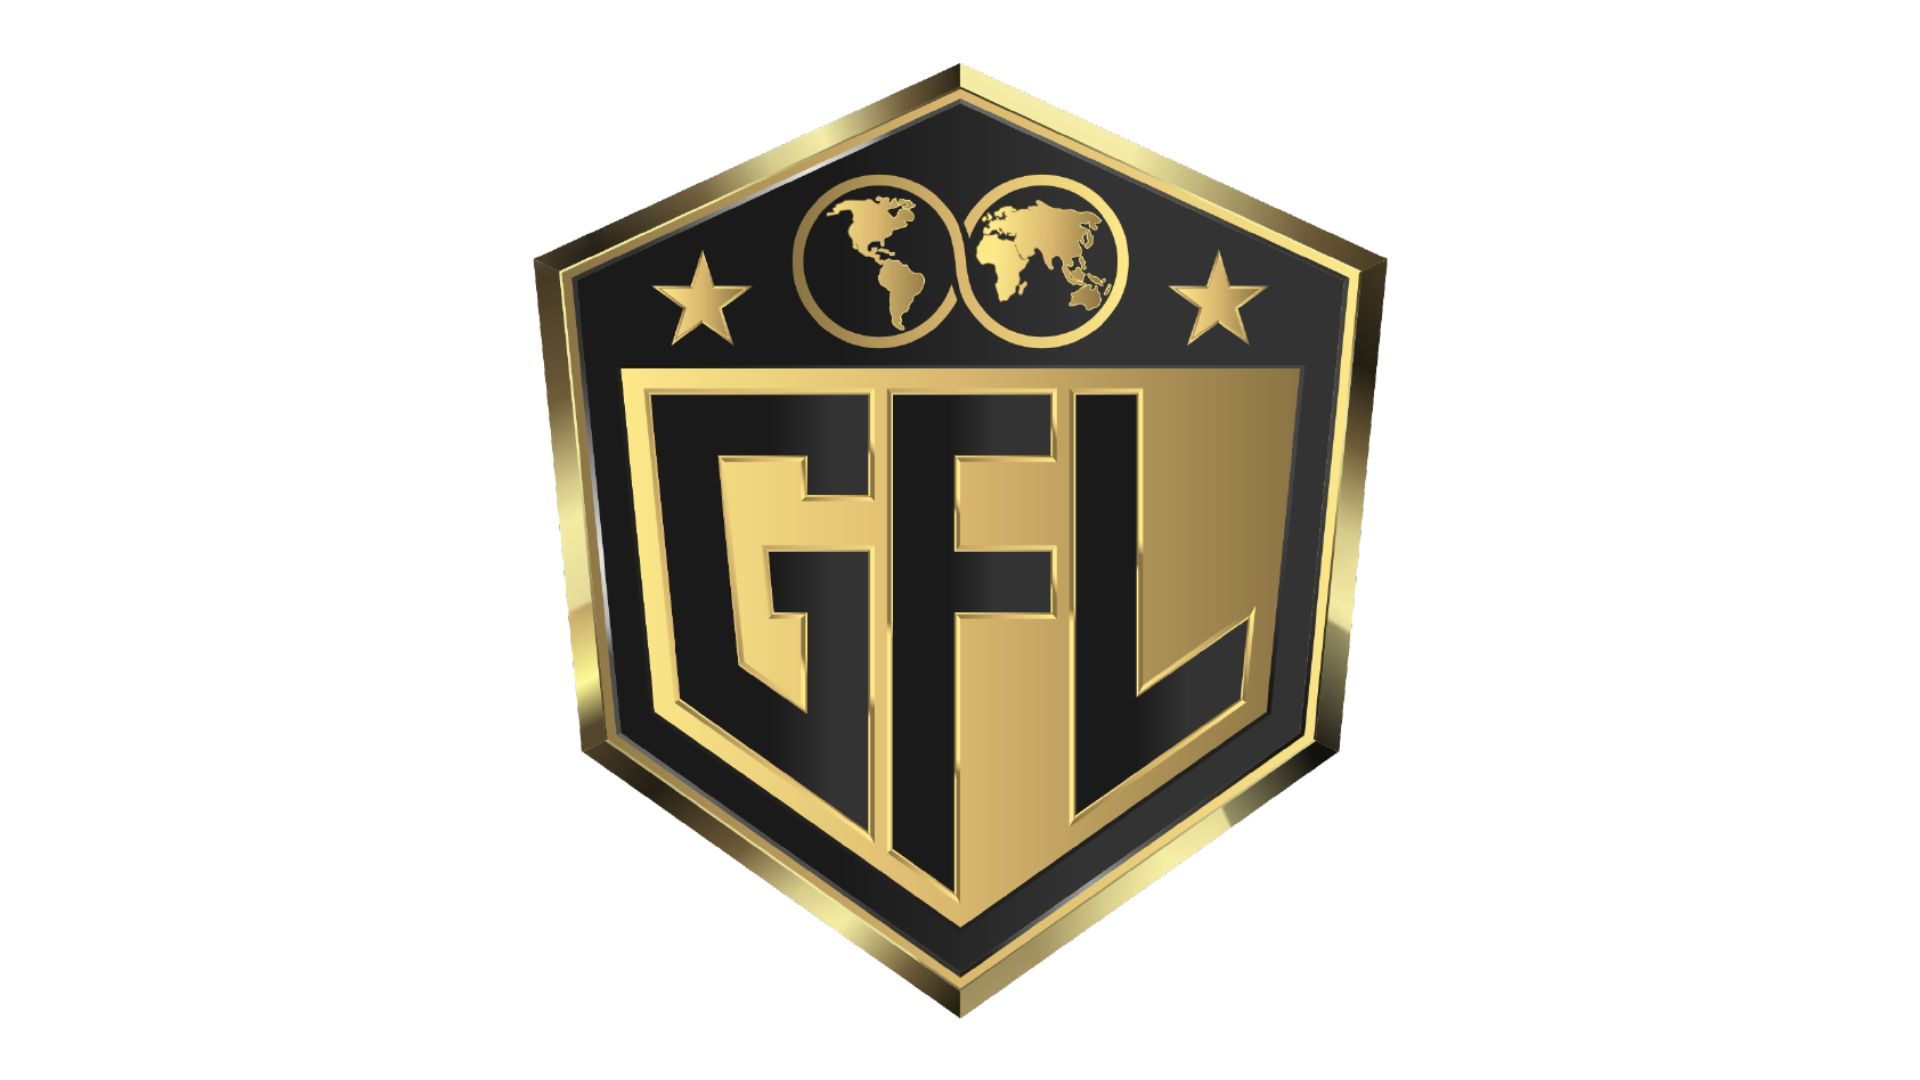 Harrison Rogers Invests $10 Million to Establish a Team in the Global Fight League